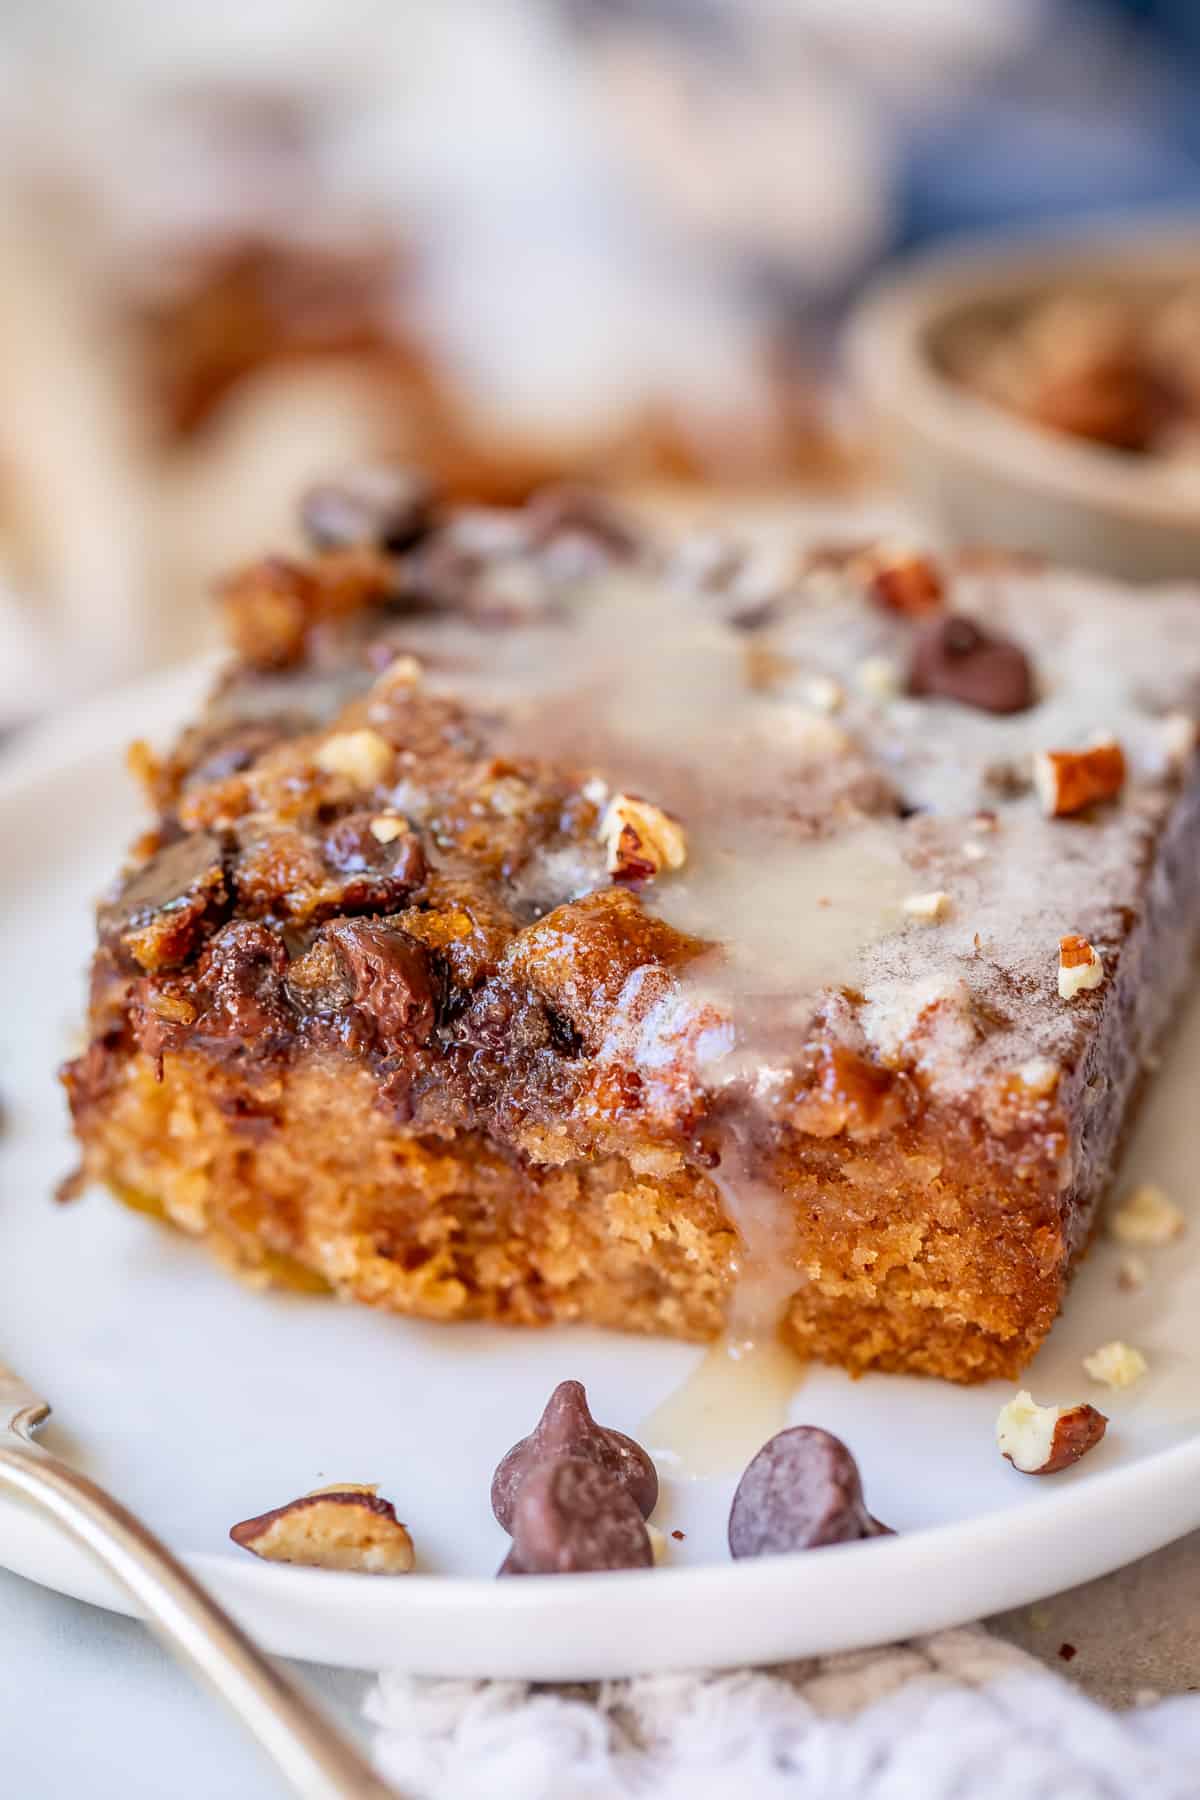 picnic cake with buttermilk glaze and brown sugar pecan chocolate topping on a ceramic plate.